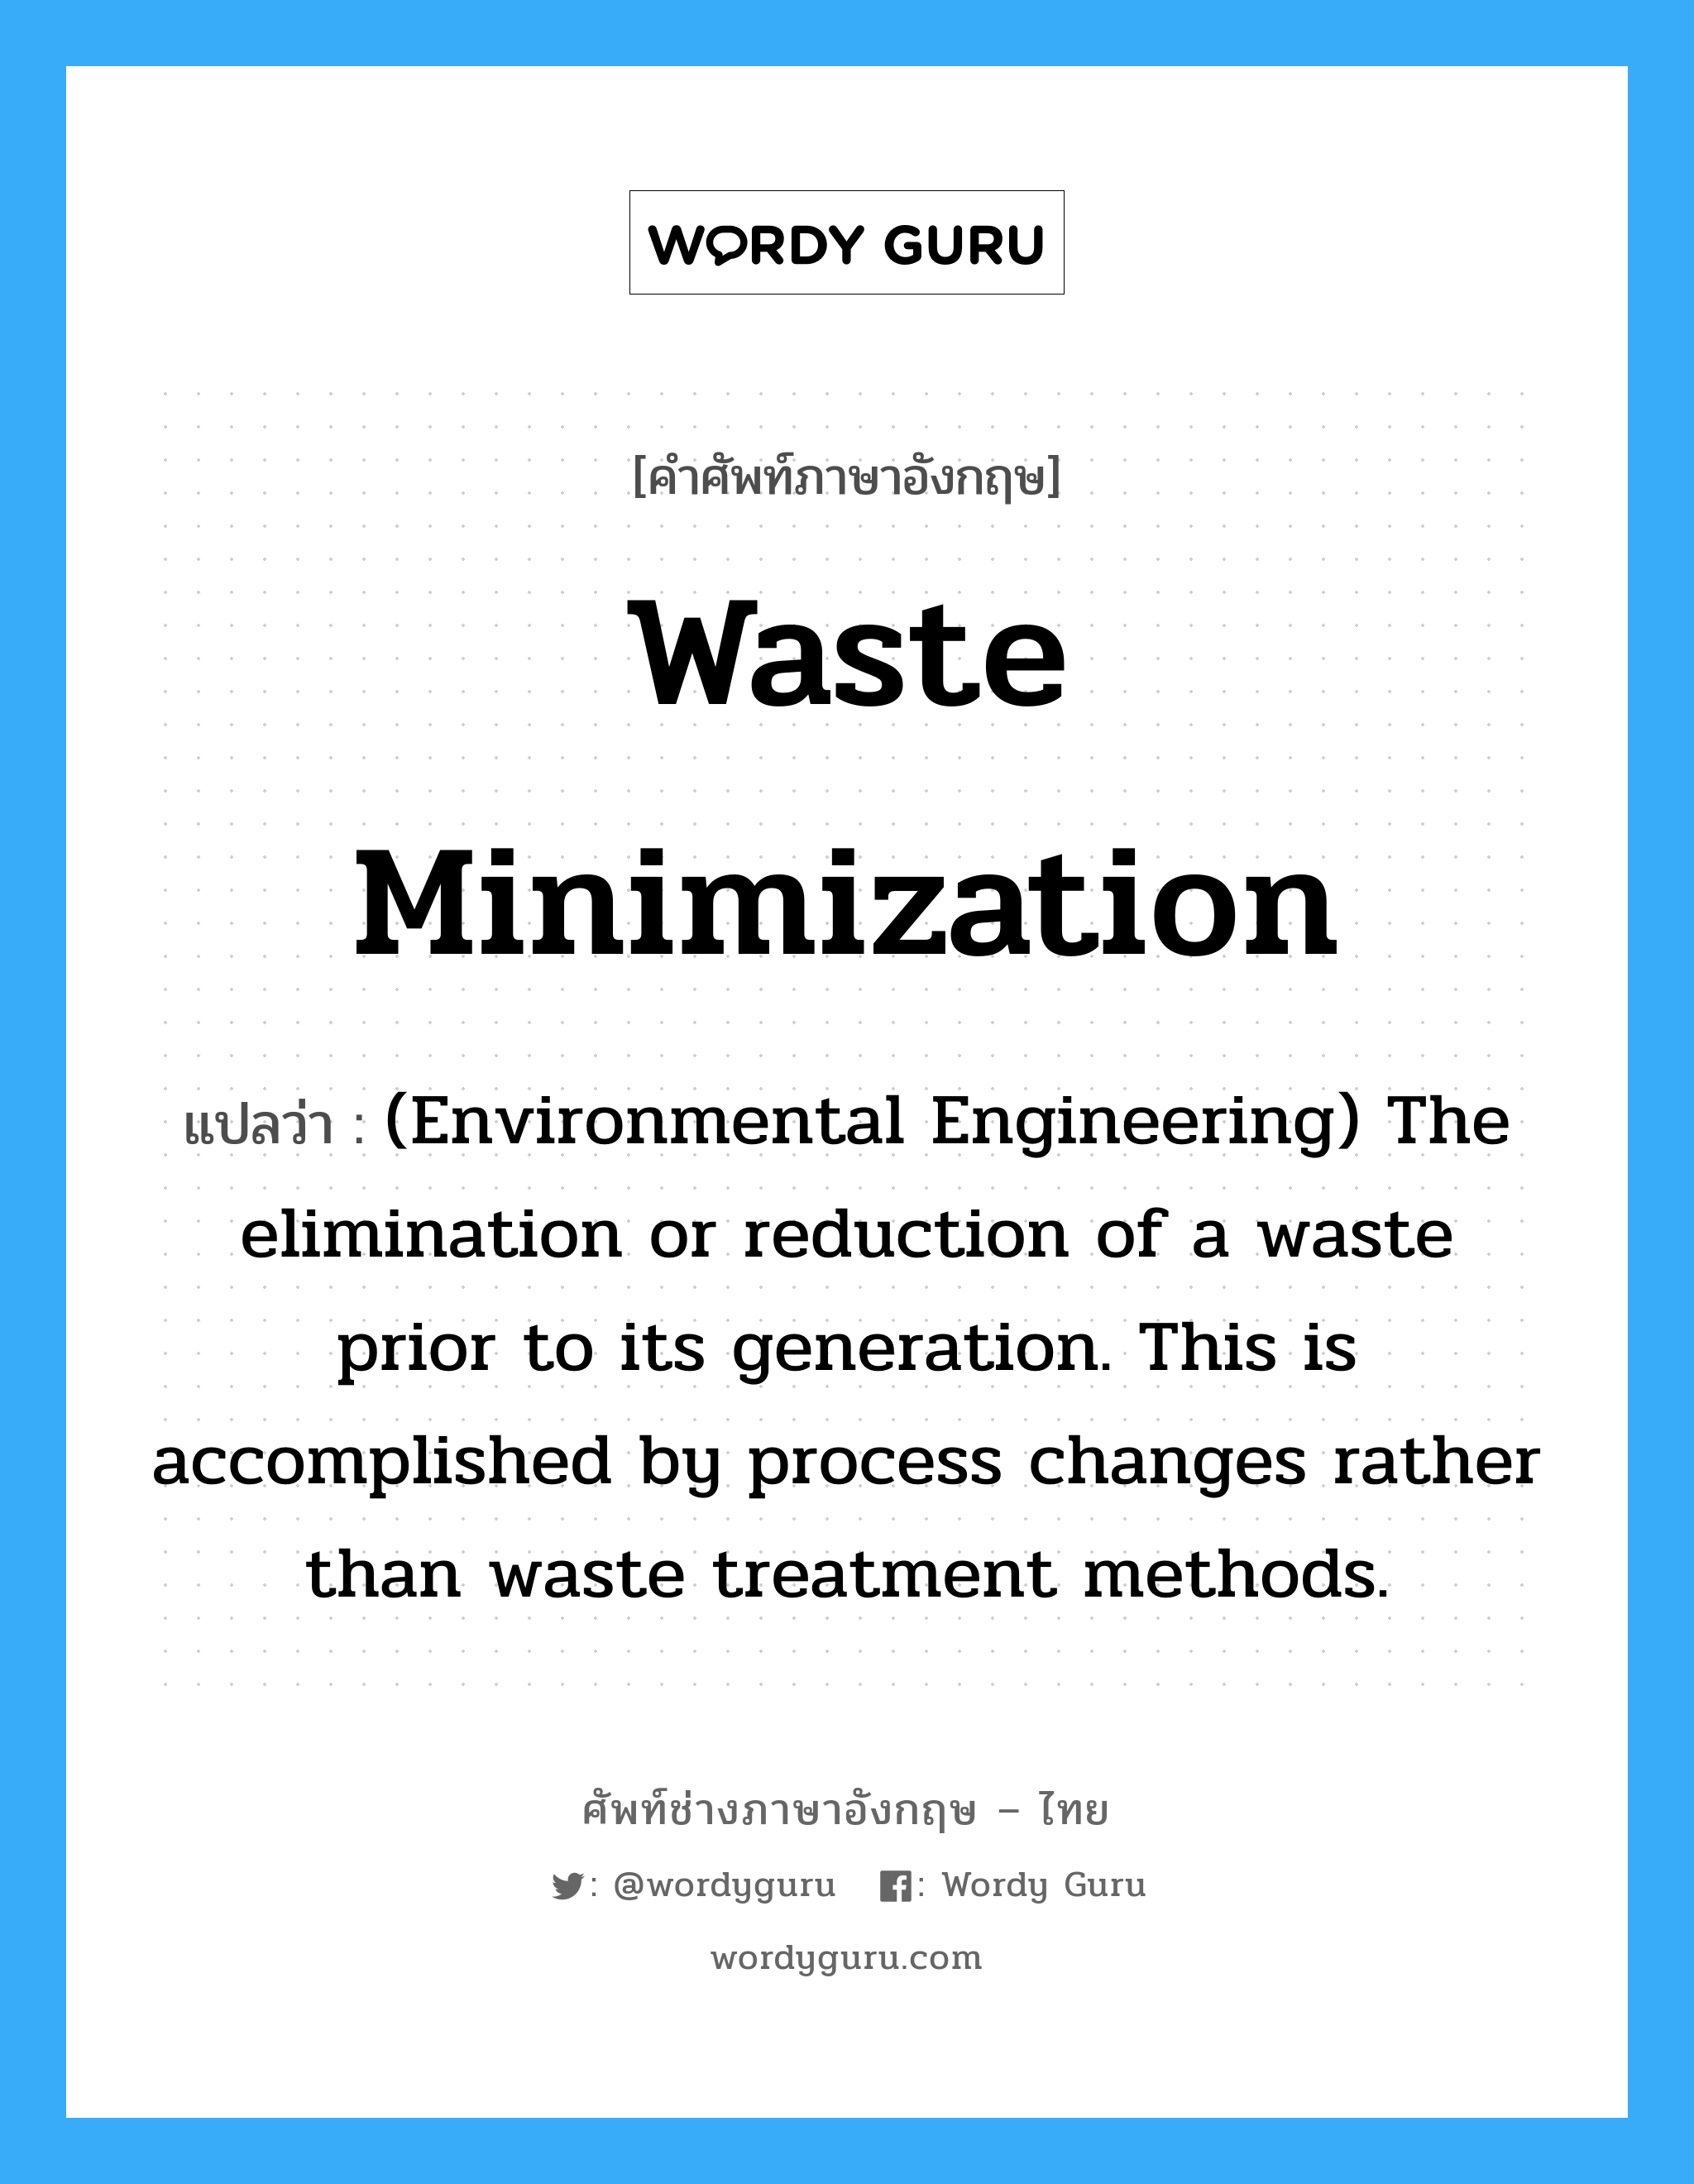 (Environmental Engineering) The elimination or reduction of a waste prior to its generation. This is accomplished by process changes rather than waste treatment methods. ภาษาอังกฤษ?, คำศัพท์ช่างภาษาอังกฤษ - ไทย (Environmental Engineering) The elimination or reduction of a waste prior to its generation. This is accomplished by process changes rather than waste treatment methods. คำศัพท์ภาษาอังกฤษ (Environmental Engineering) The elimination or reduction of a waste prior to its generation. This is accomplished by process changes rather than waste treatment methods. แปลว่า Waste minimization